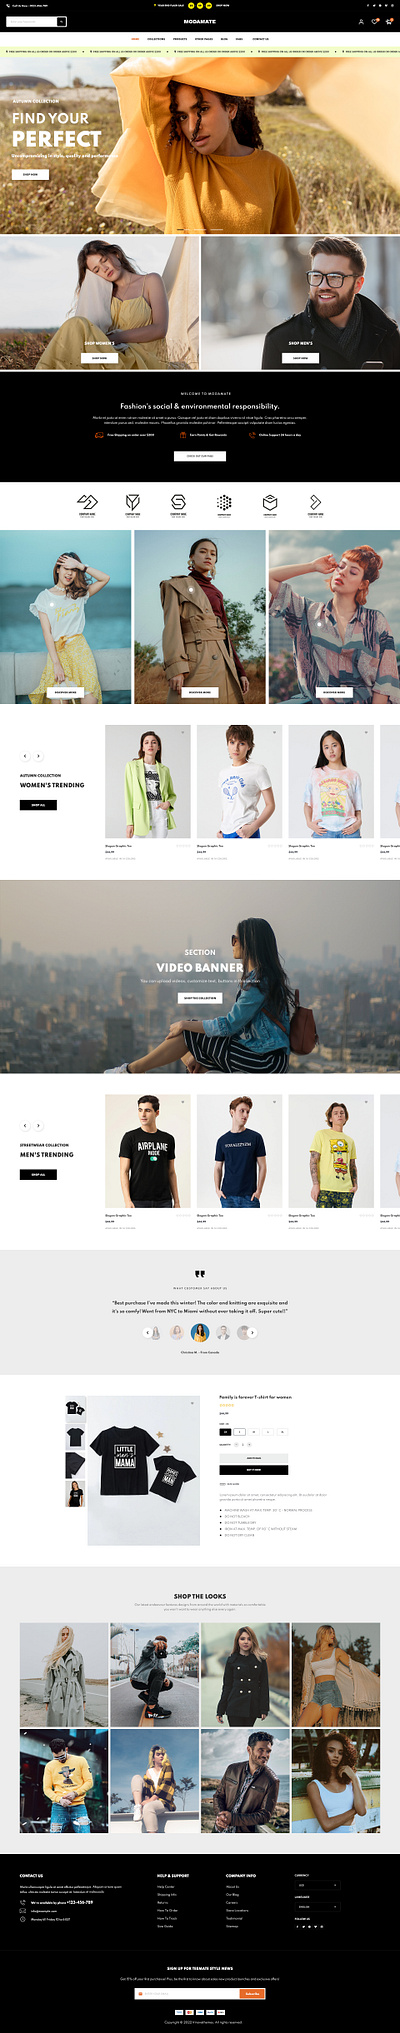 Mate - Clothes and Fashion Accessories Shopify Theme clothes website clothing website dropshipping envato fashion website outfits website shopify shopify expert shopify store shopify template shopify theme themeforest ux ui web design web designer website design